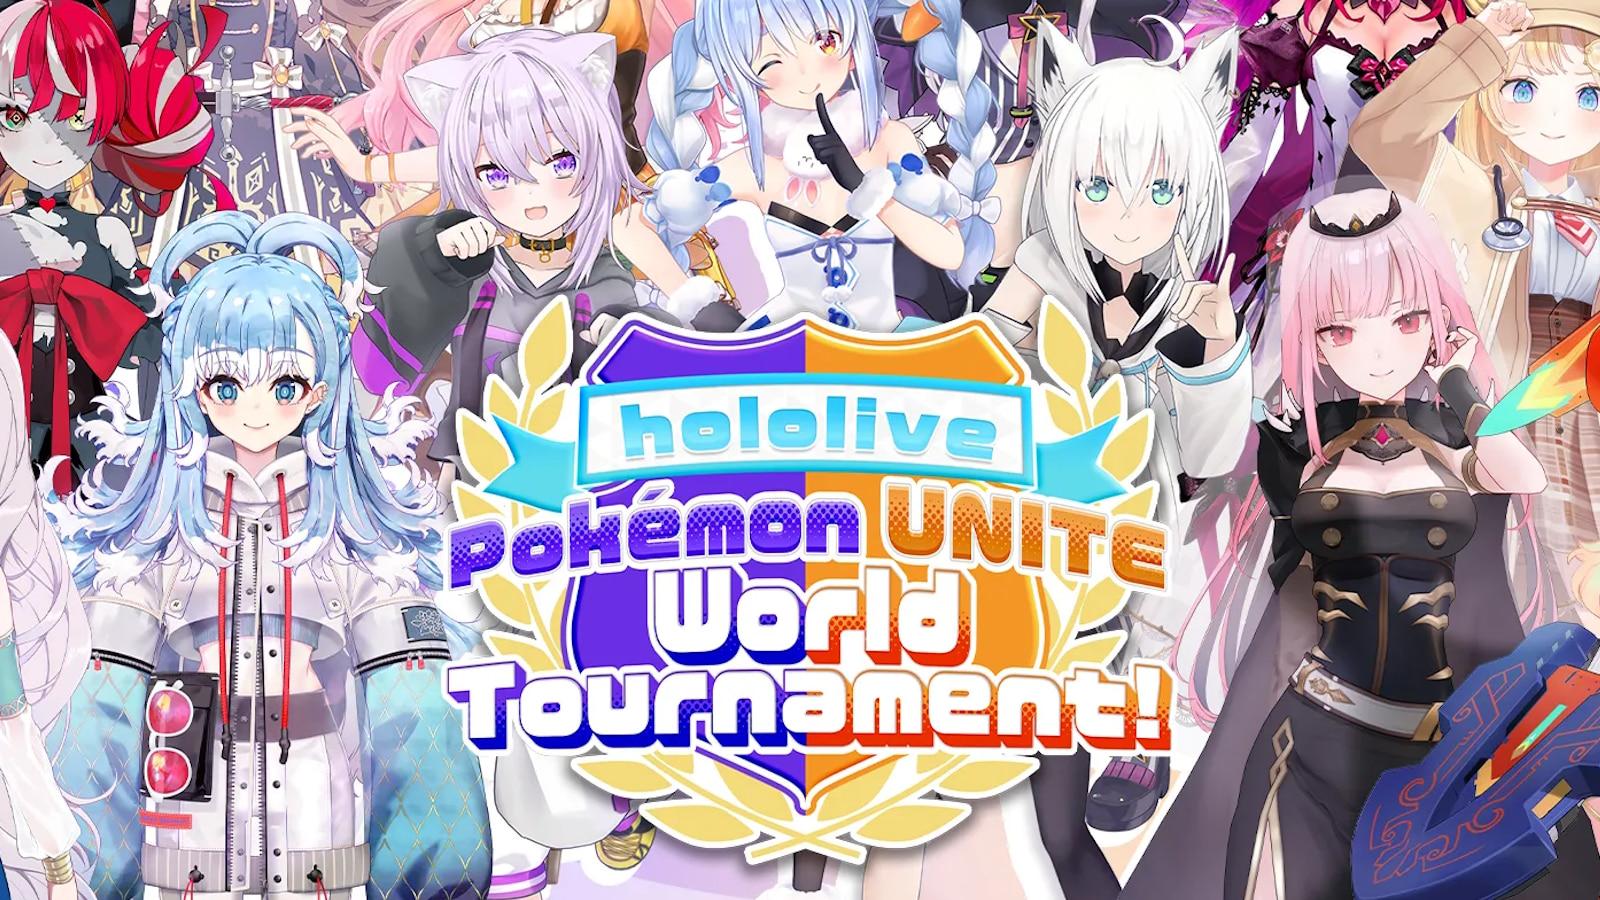 The upcoming Pokemon Unite World Tournament hosted by Hololive featuring 15 Vtubers.